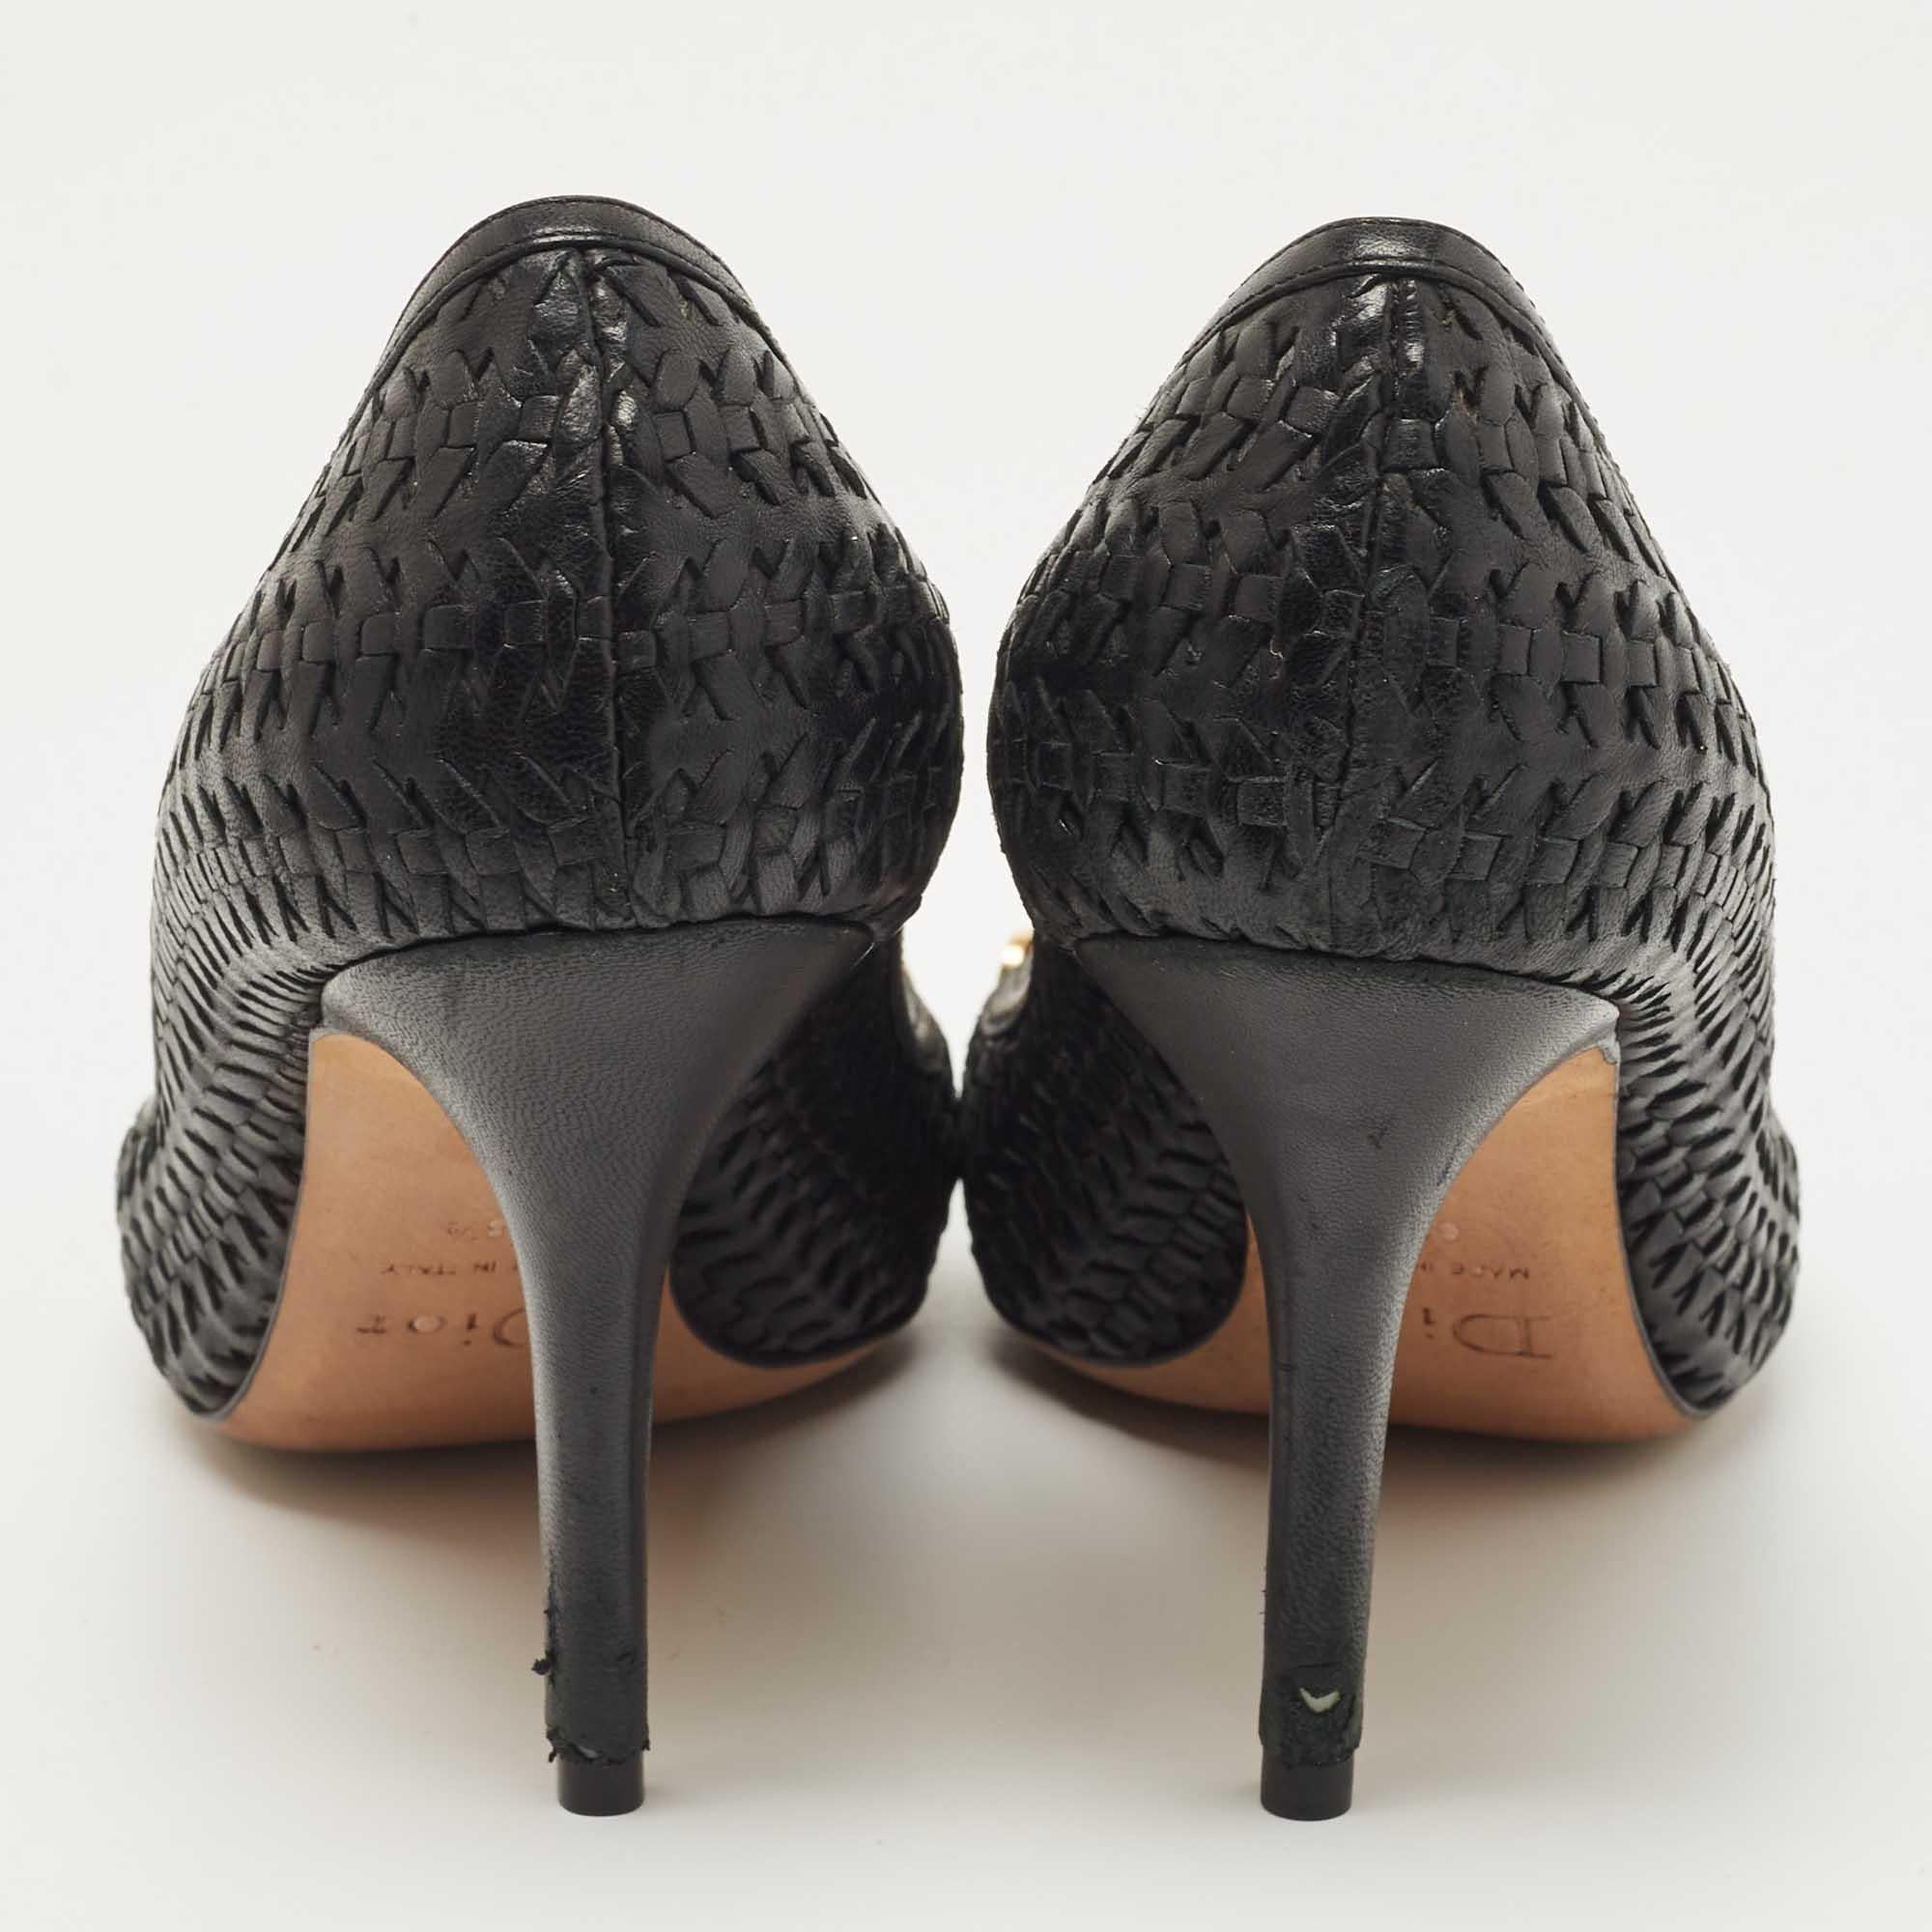 Dior Black Woven Leather CD Charm Bow Pumps Size 38.5 1